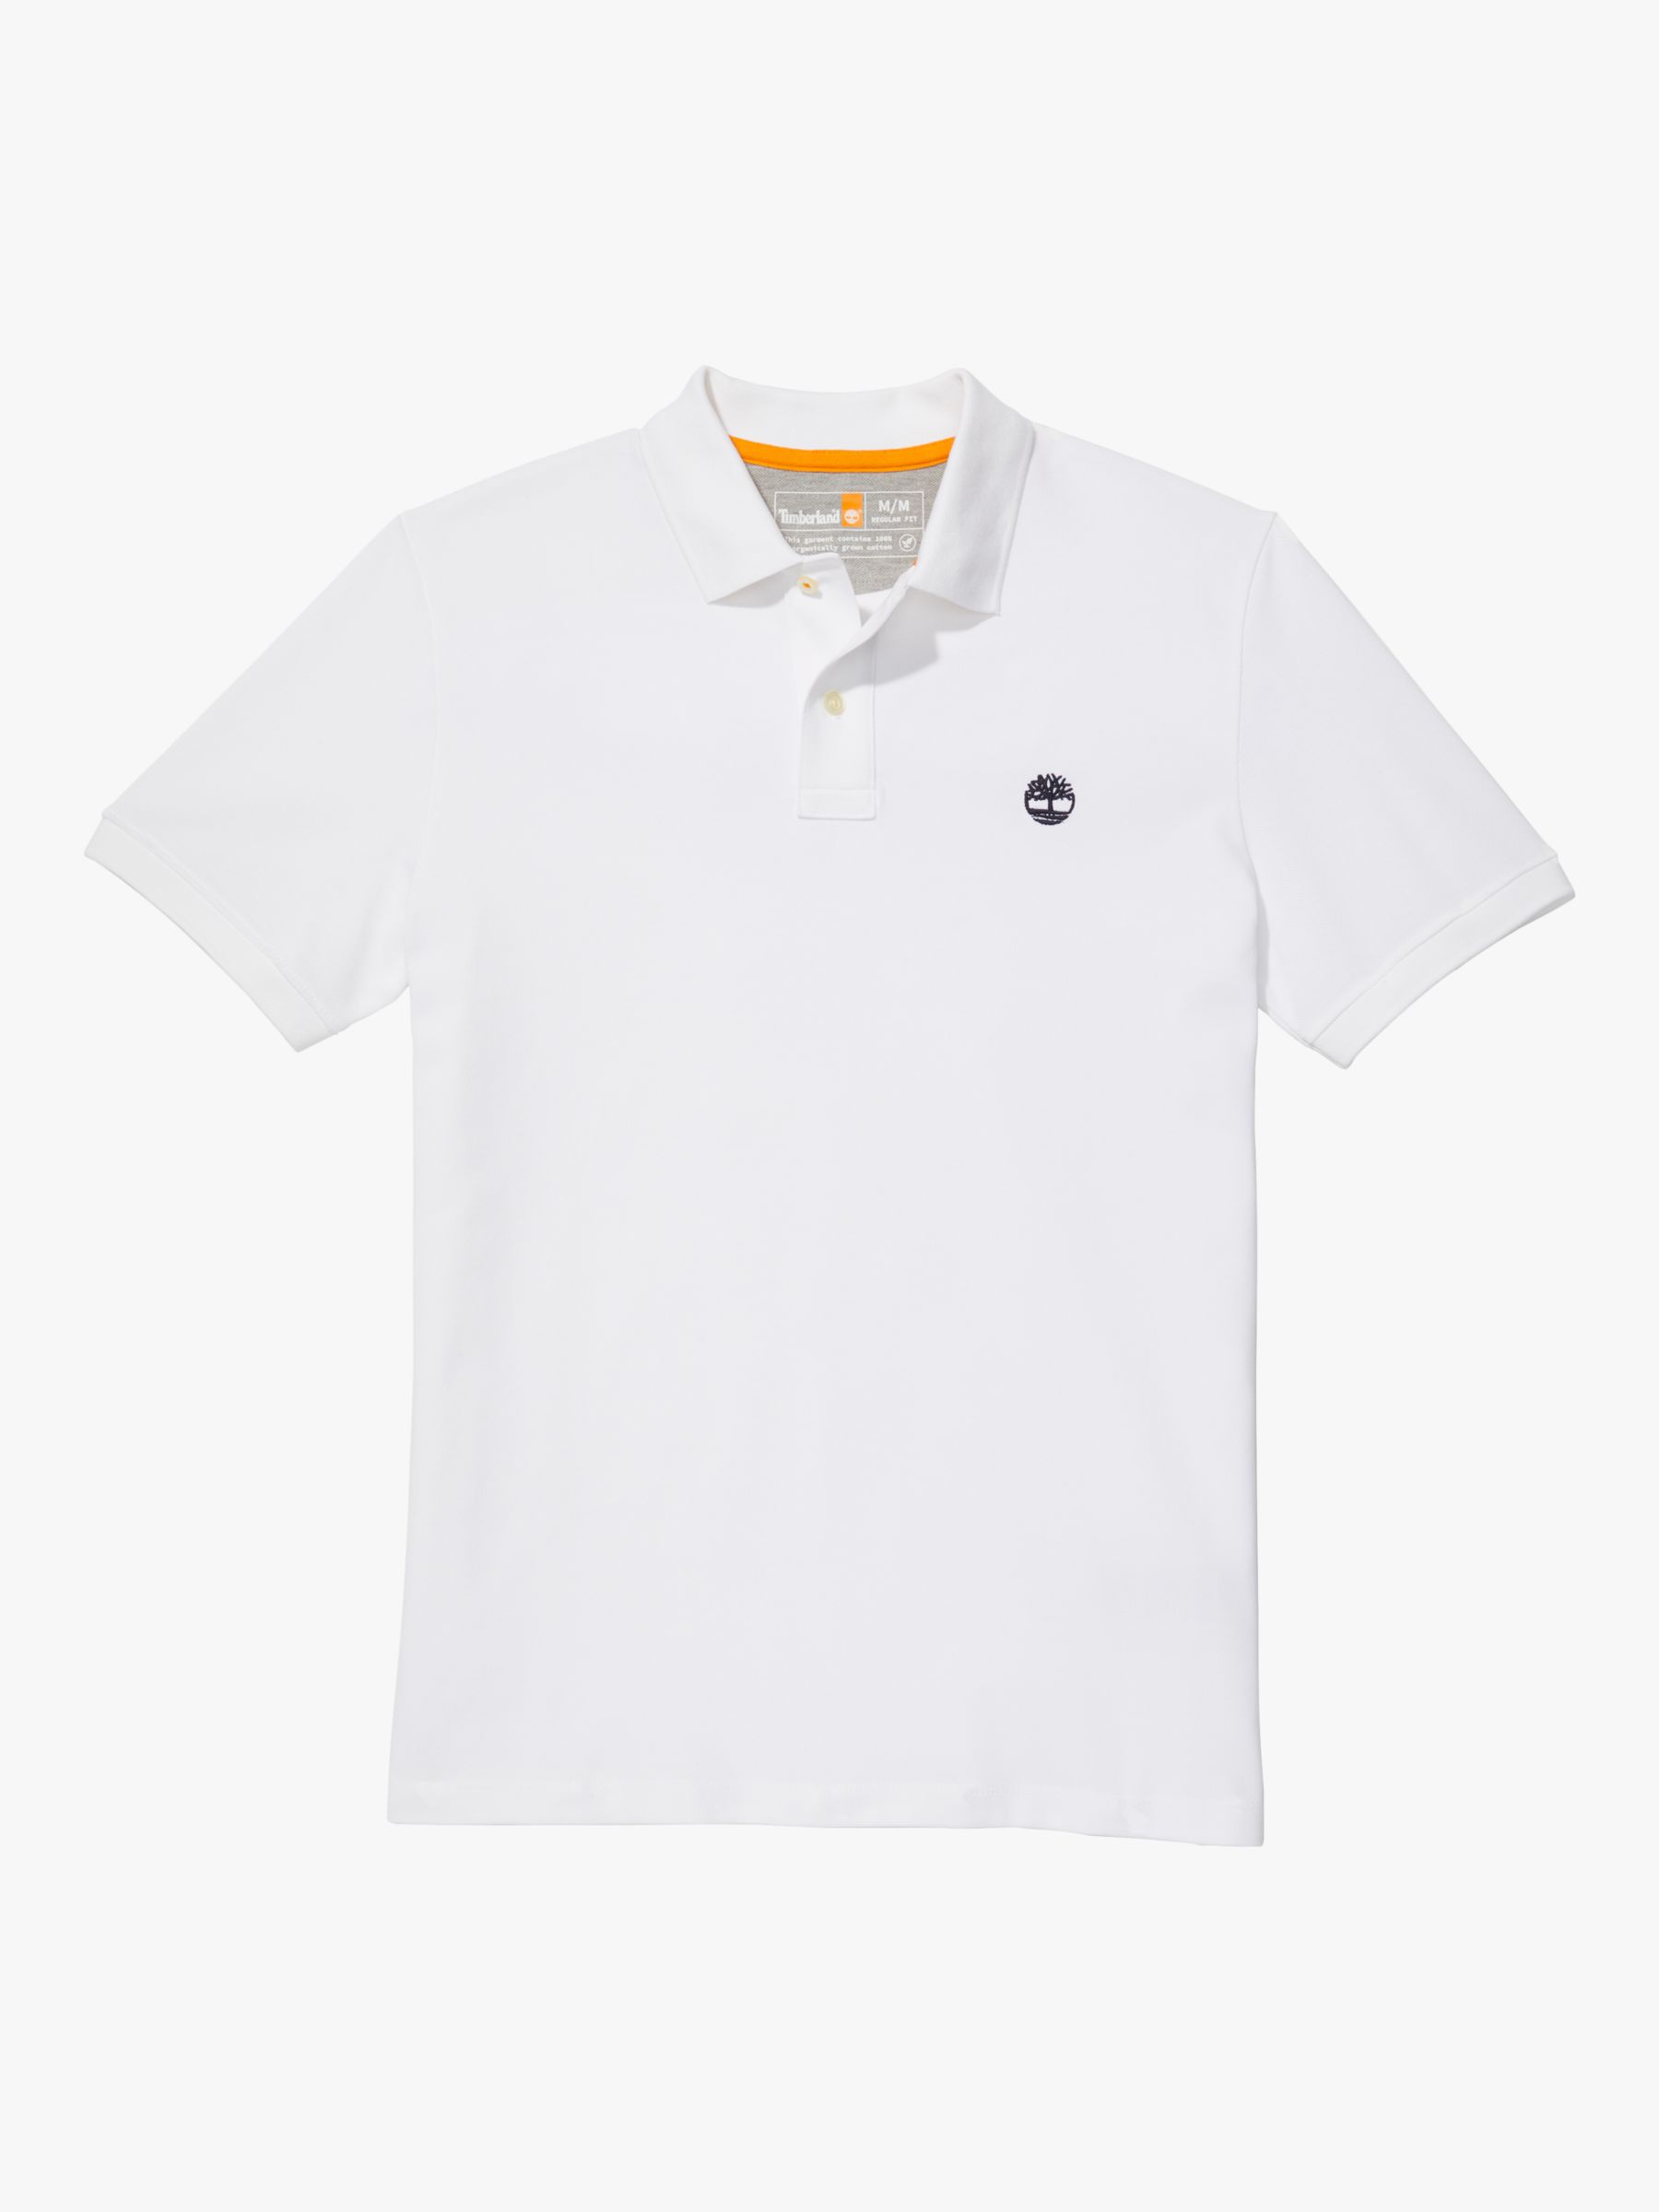 Timberland Millers Organic Cotton Pique Polo Shirt, White, S